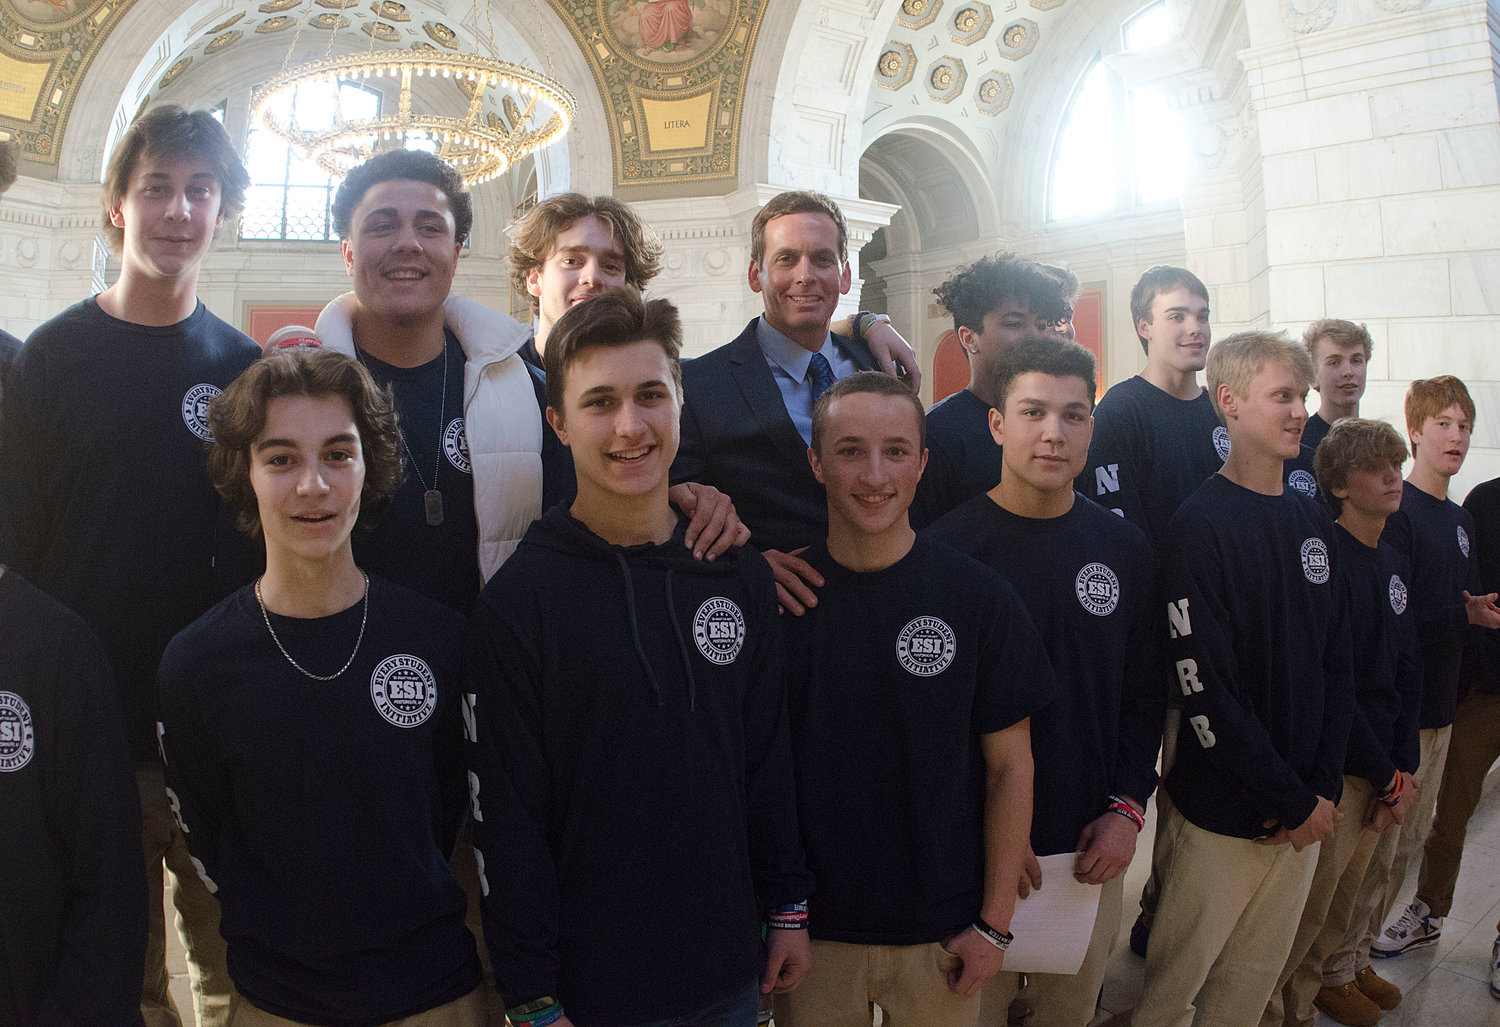 Every Student Initiative members pose for a photo in a hallway at the State House before a Senate subcommittee hearing.